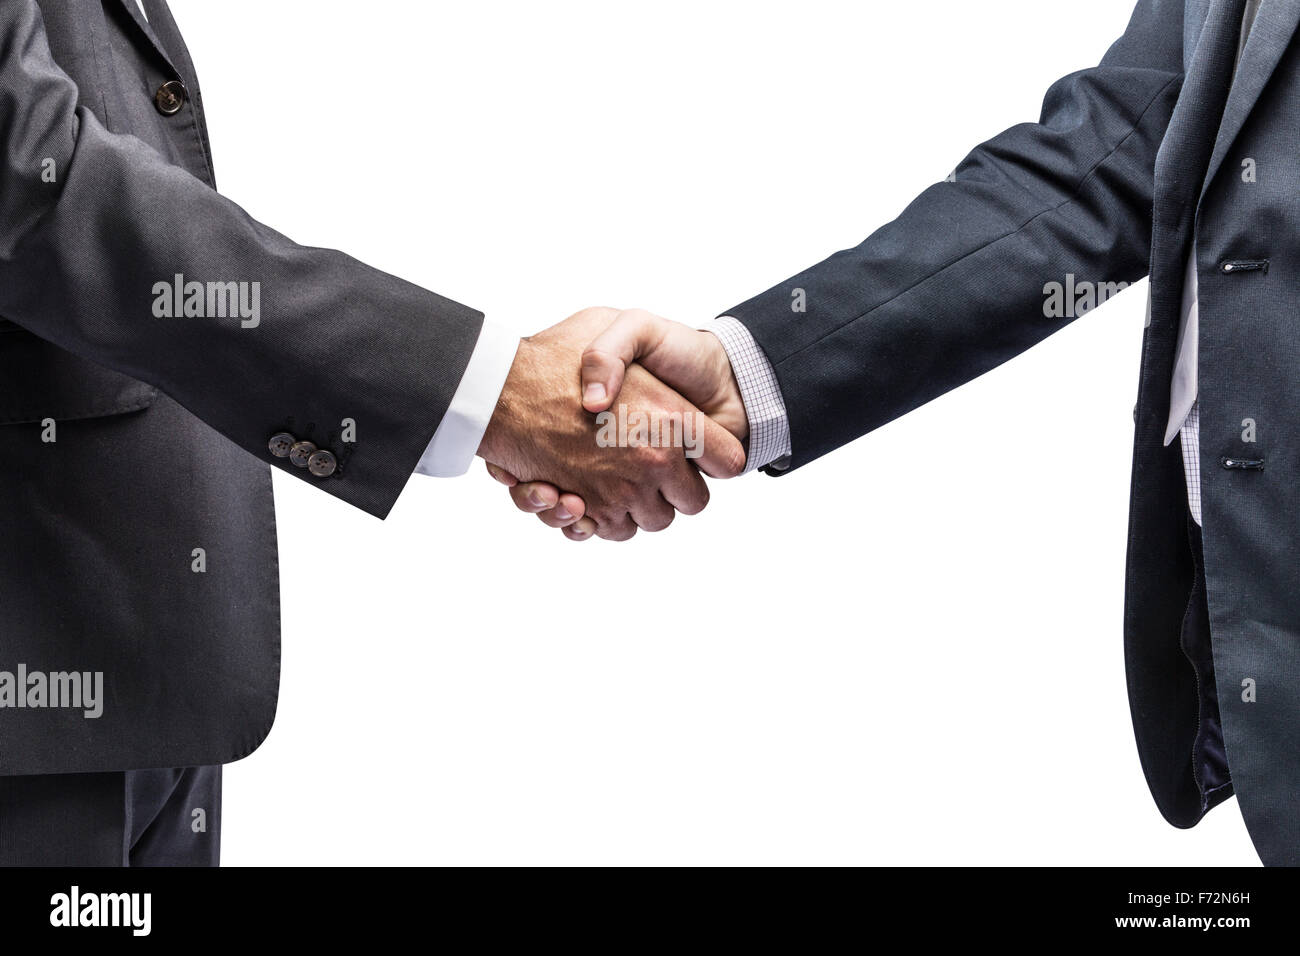 Handshake. Closeup shot of hands. File contains clipping paths. Stock Photo